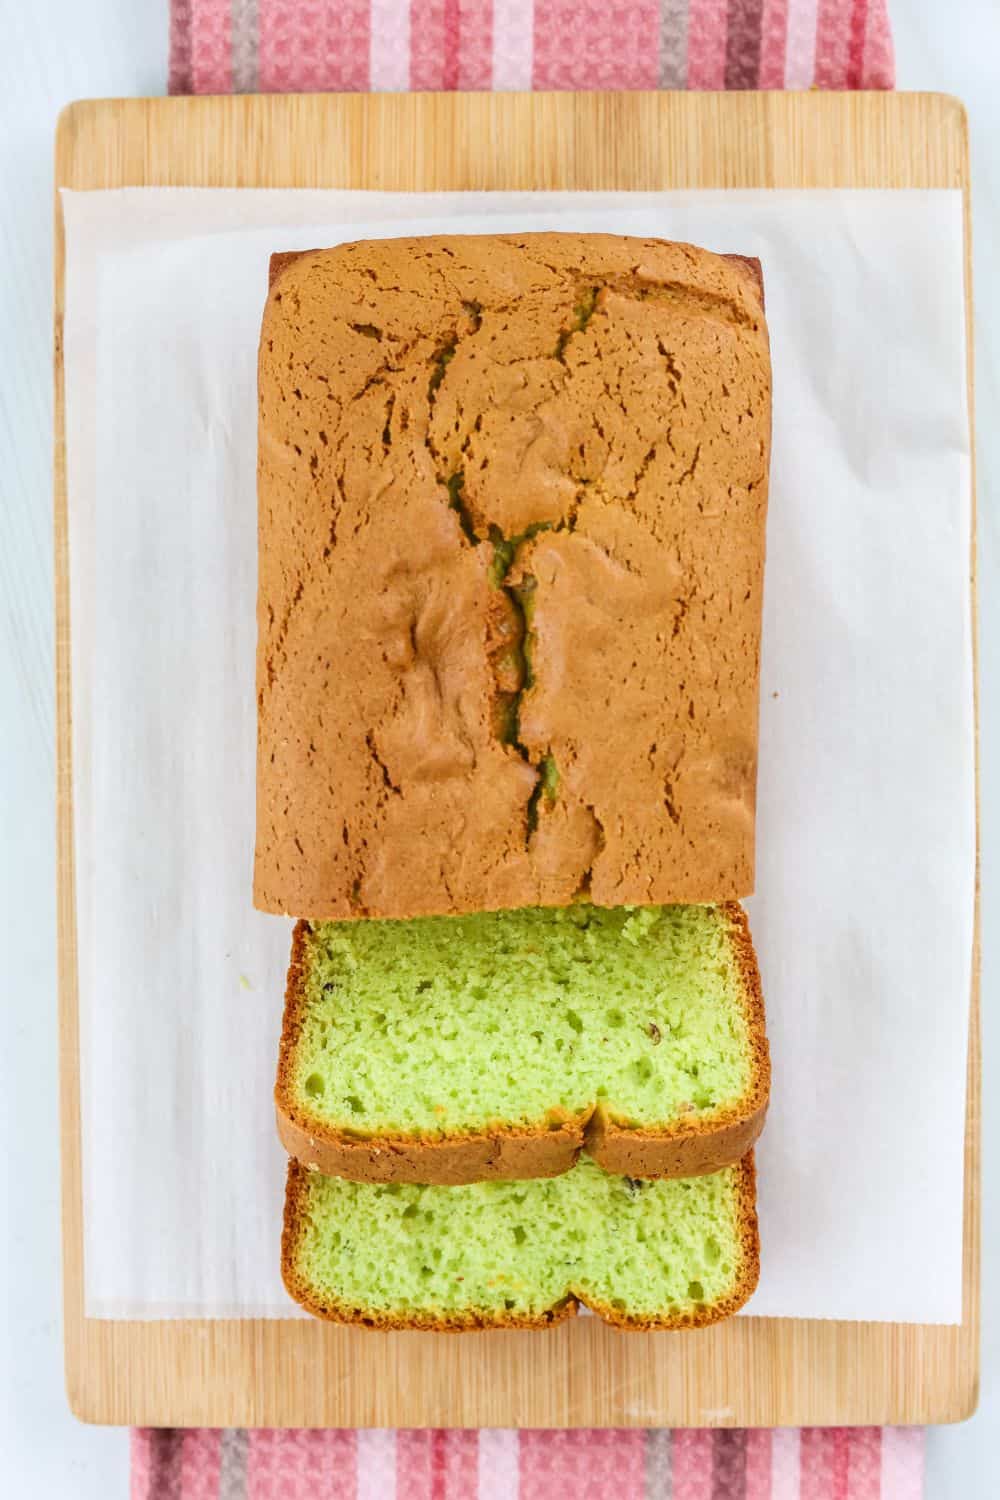 overhead view of a loaf of pistachio bread made with pudding mix, which is partially sliced on a cutting board, displaying the green slices that are perfect for holidays.